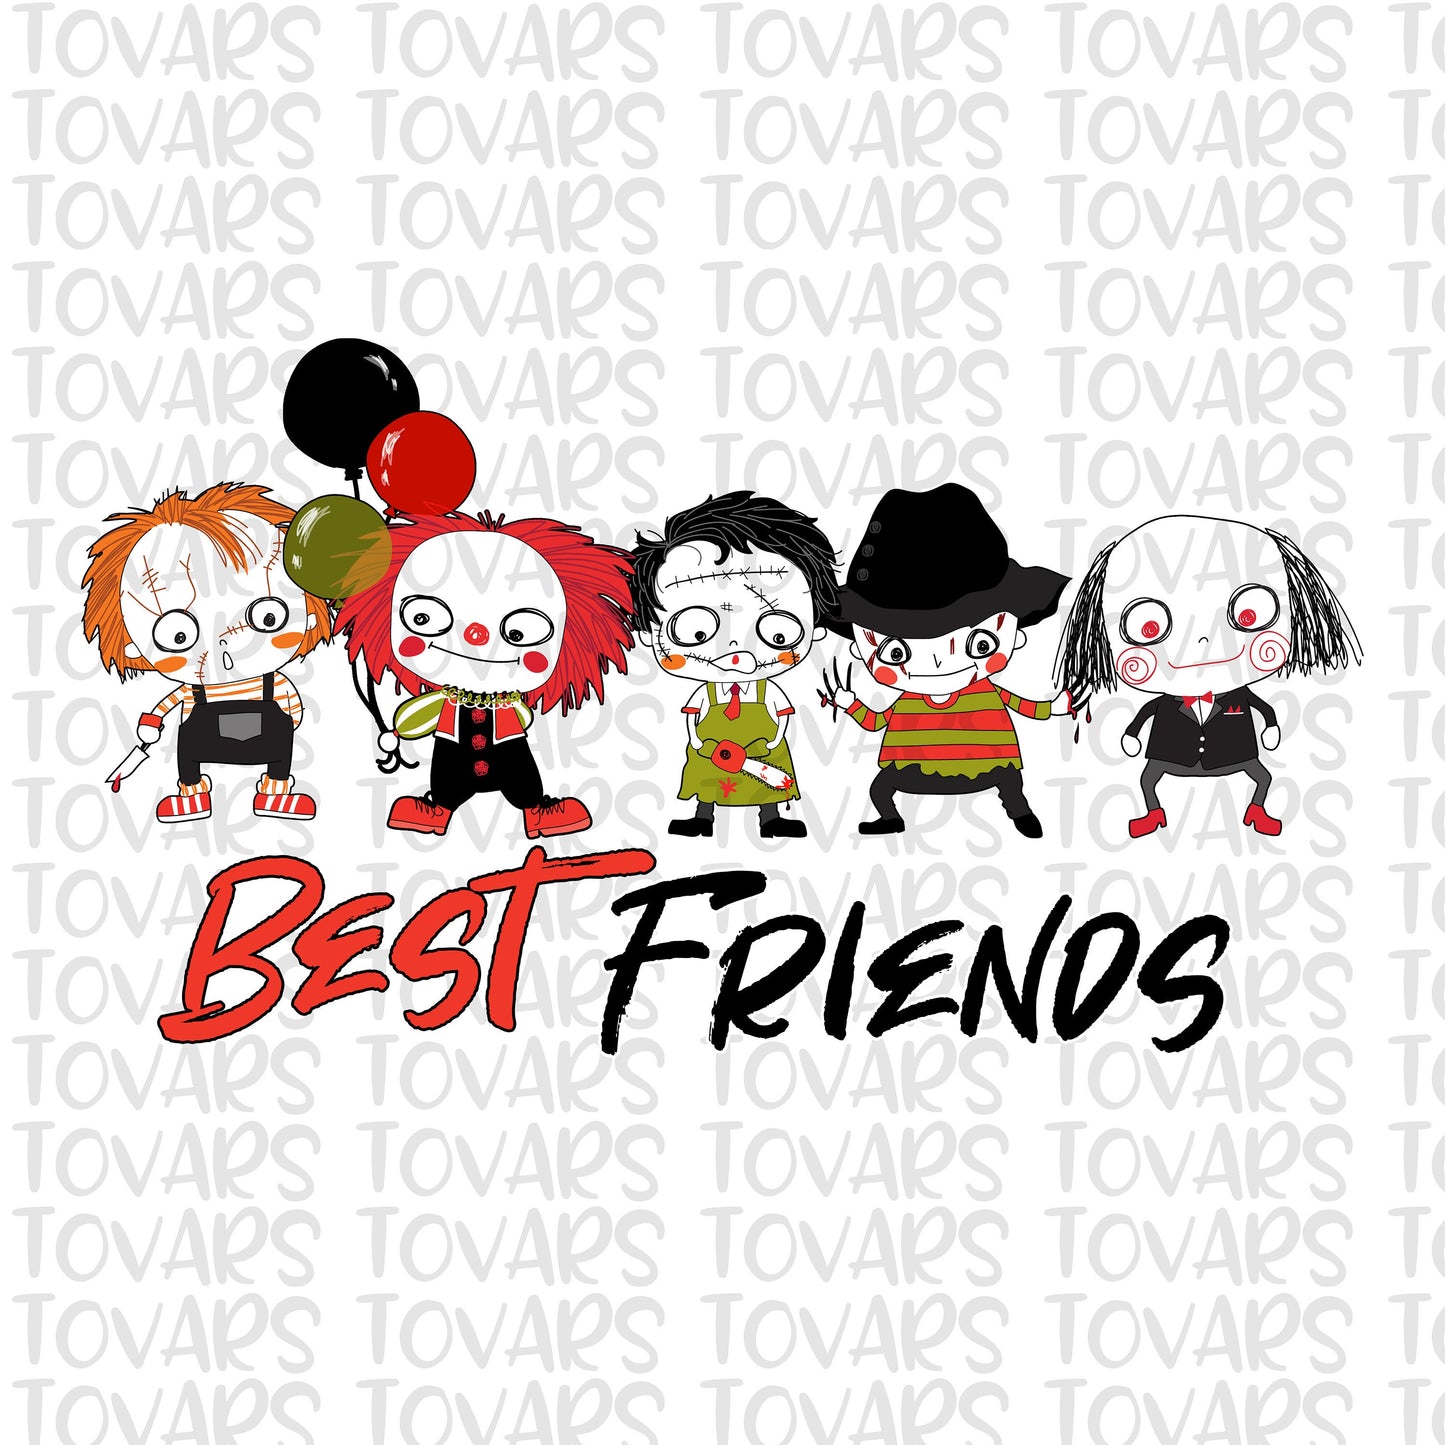 Best Friends Serial Killers Sublimation Download, Halloween PNG File, Instant Download, Sublimation Horror Movie Design, Horror movie design